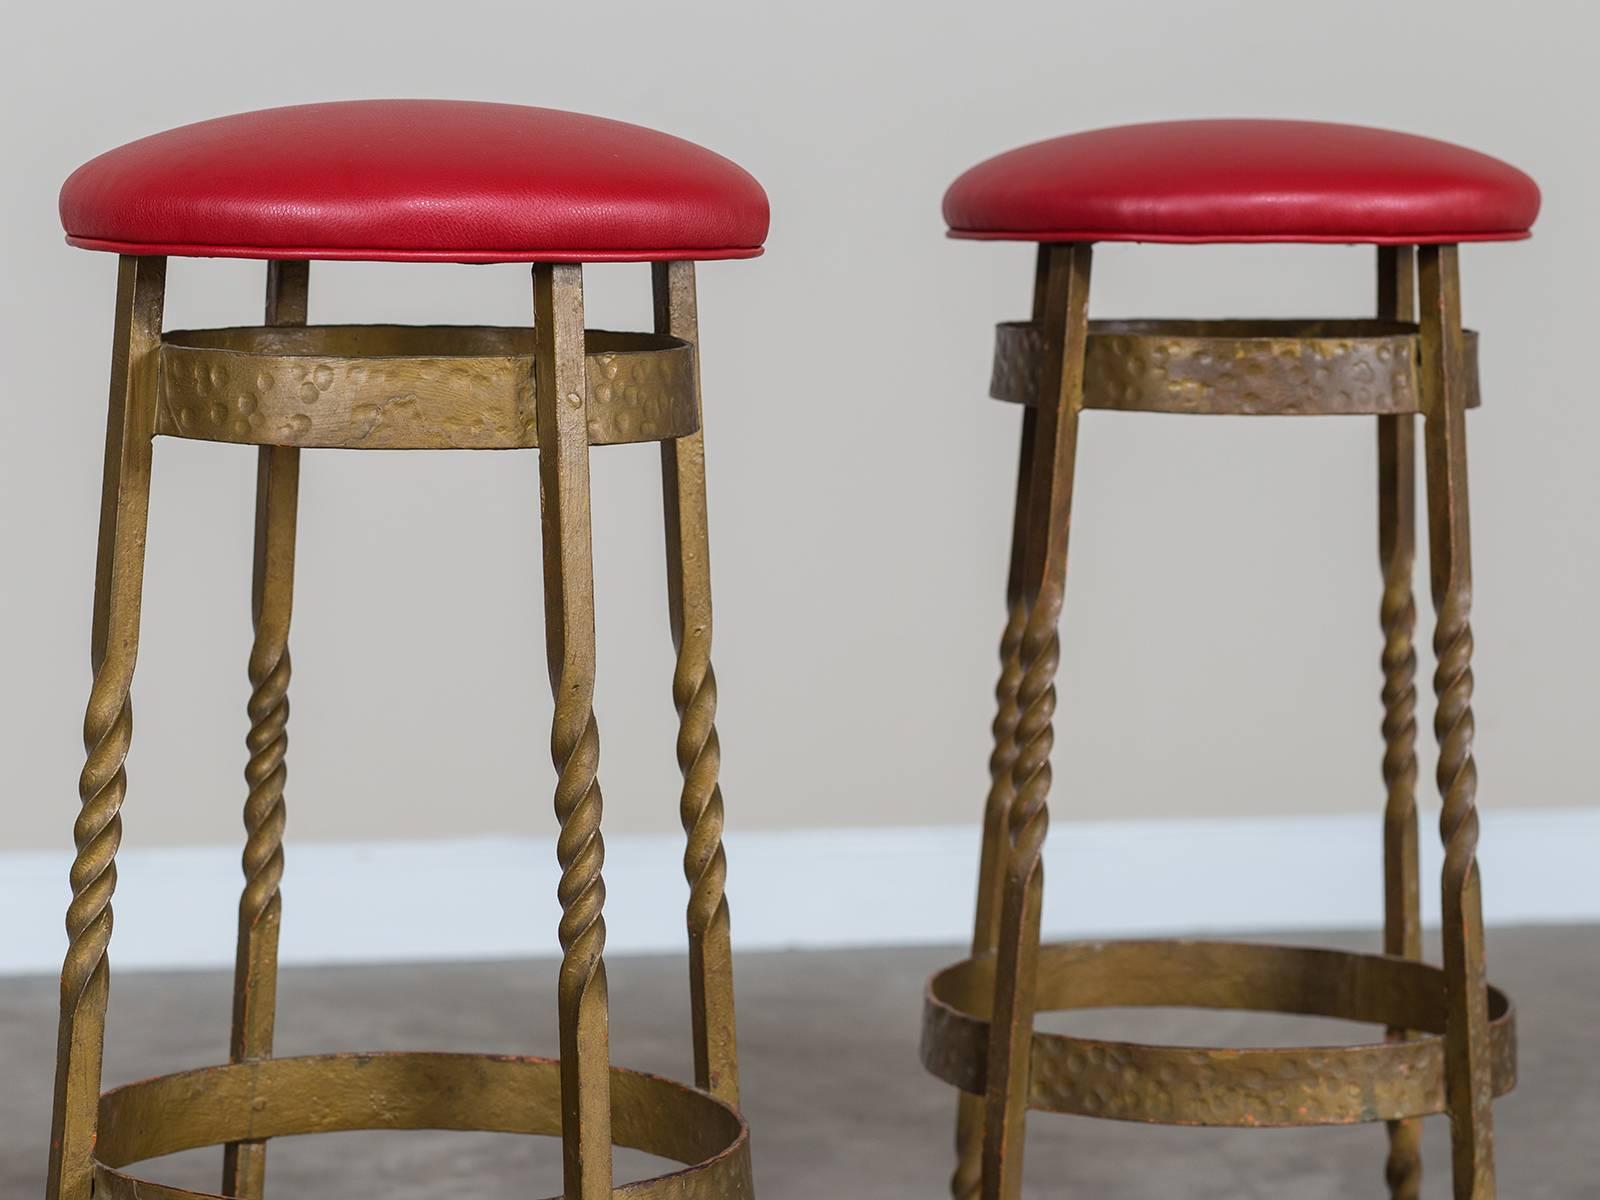 Receive our new selections direct from 1stdibs by email each week. Please click Follow Dealer below and see them first!

The forged iron on this set of vintage French Art Deco stools retains the original gilded finish, circa 1930. All four solid